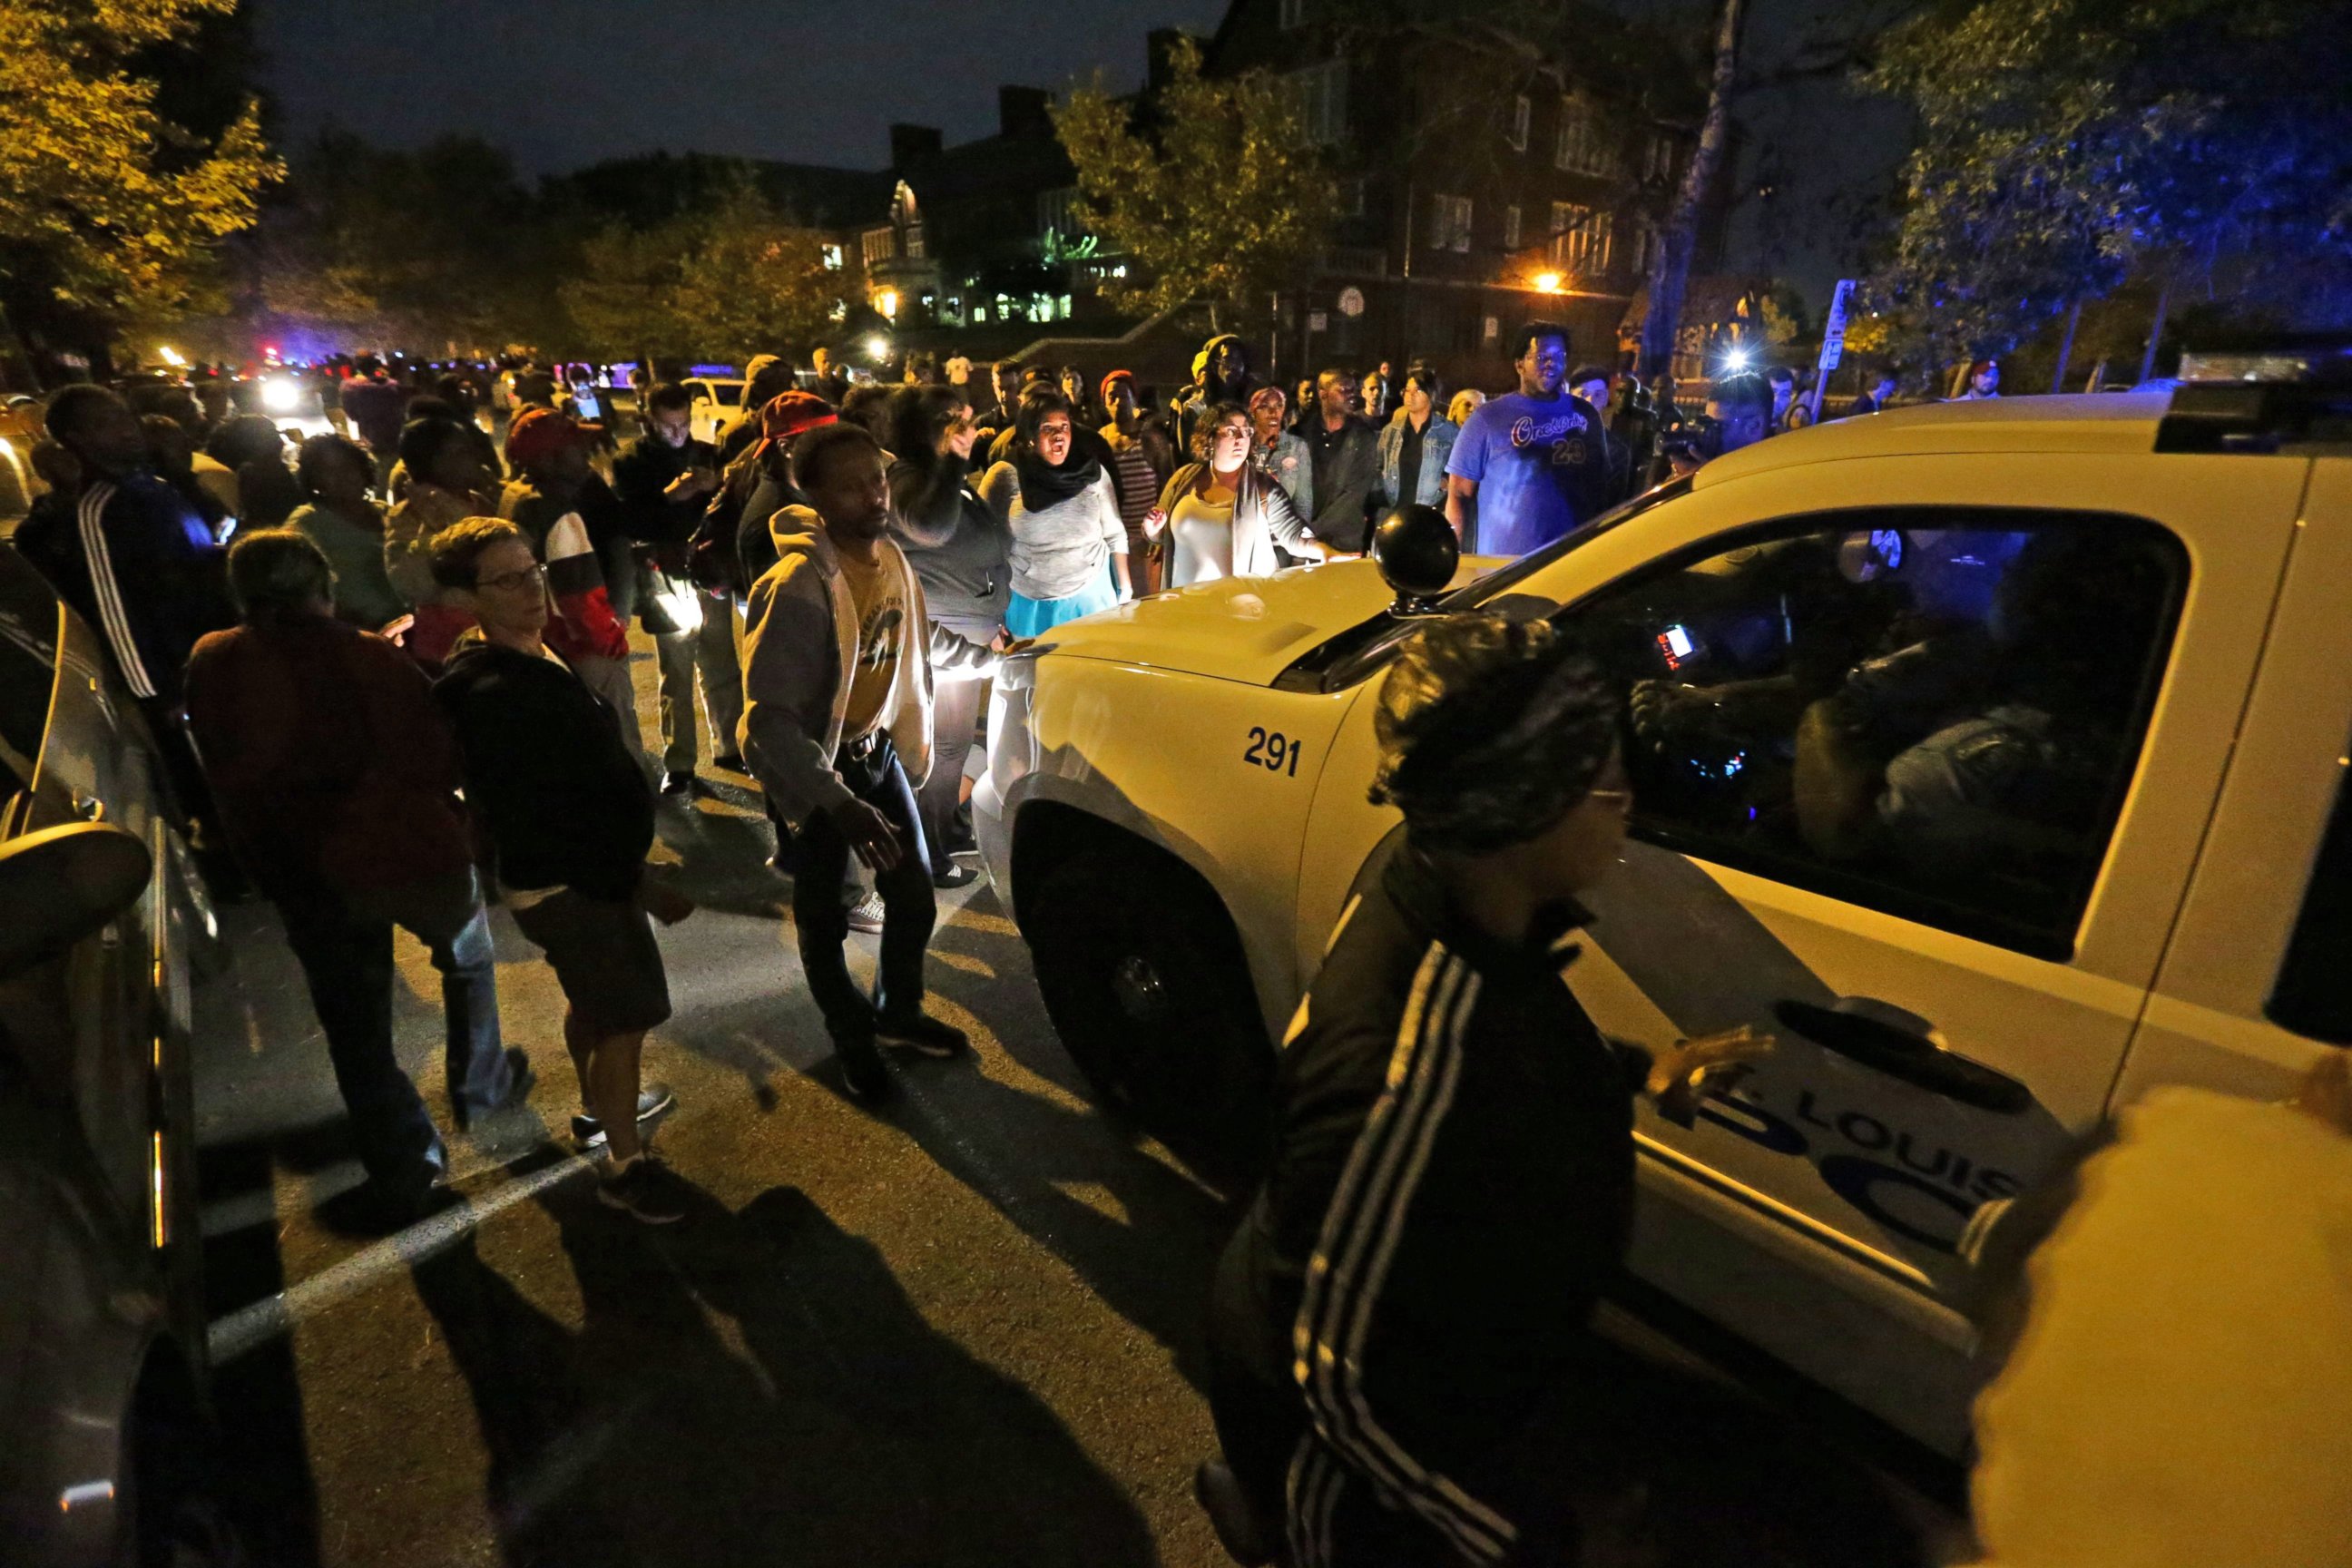 PHOTO: A crowd gathers Wednesday near the scene in south St. Louis where a man was fatally shot by an off-duty St. Louis police officer, Oct. 8, 2014.